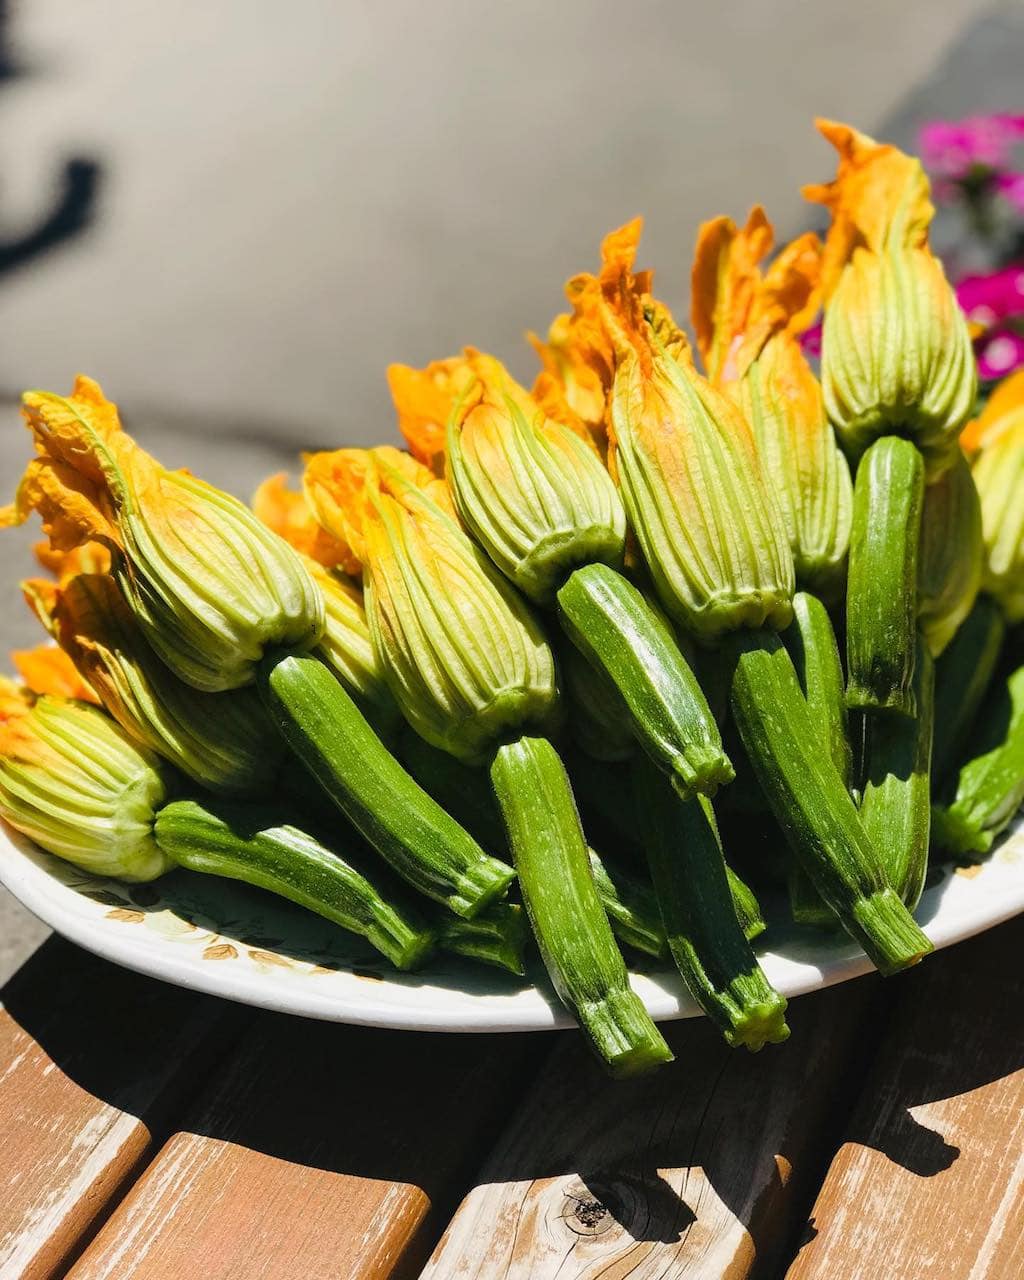 Our suggestions of places to enjoy zucchini flowers